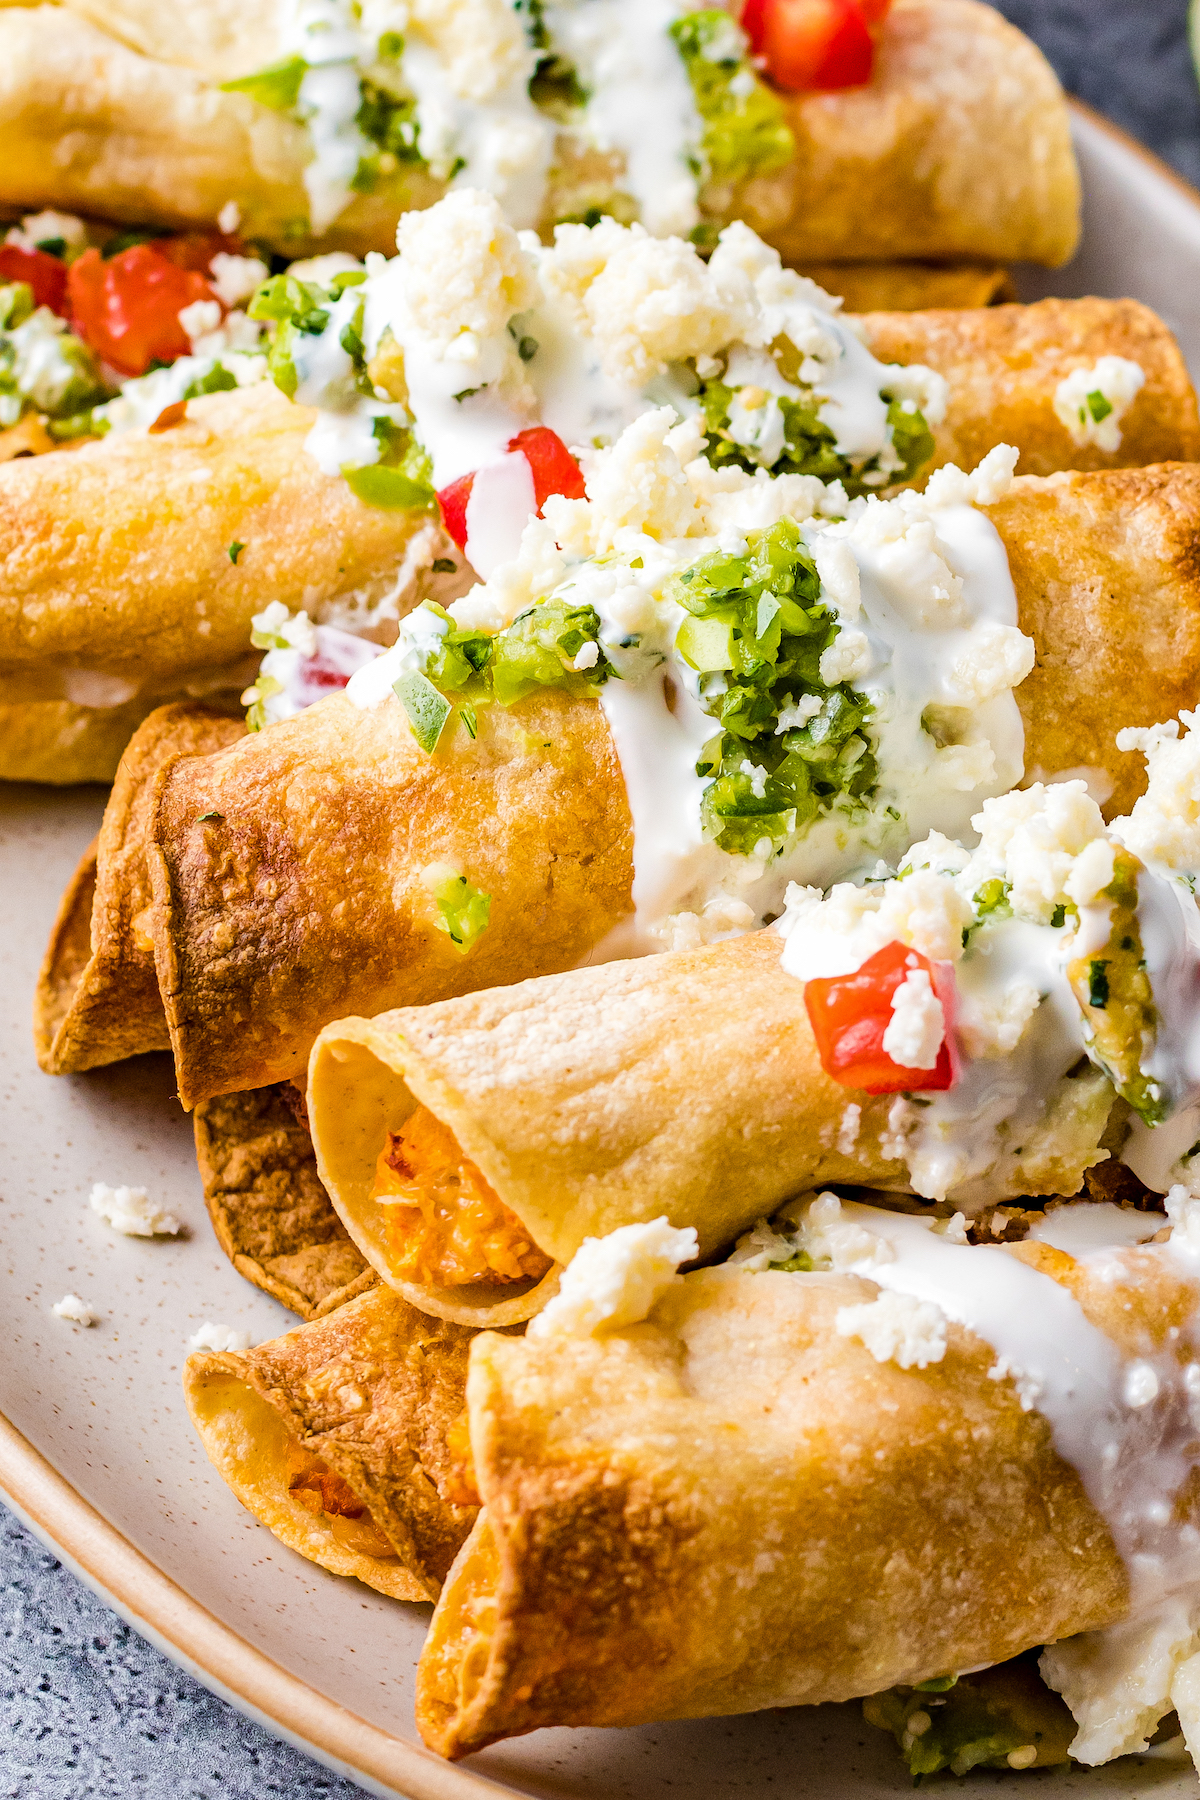 A platter of chicken taquitos garnished with crema and other toppings.